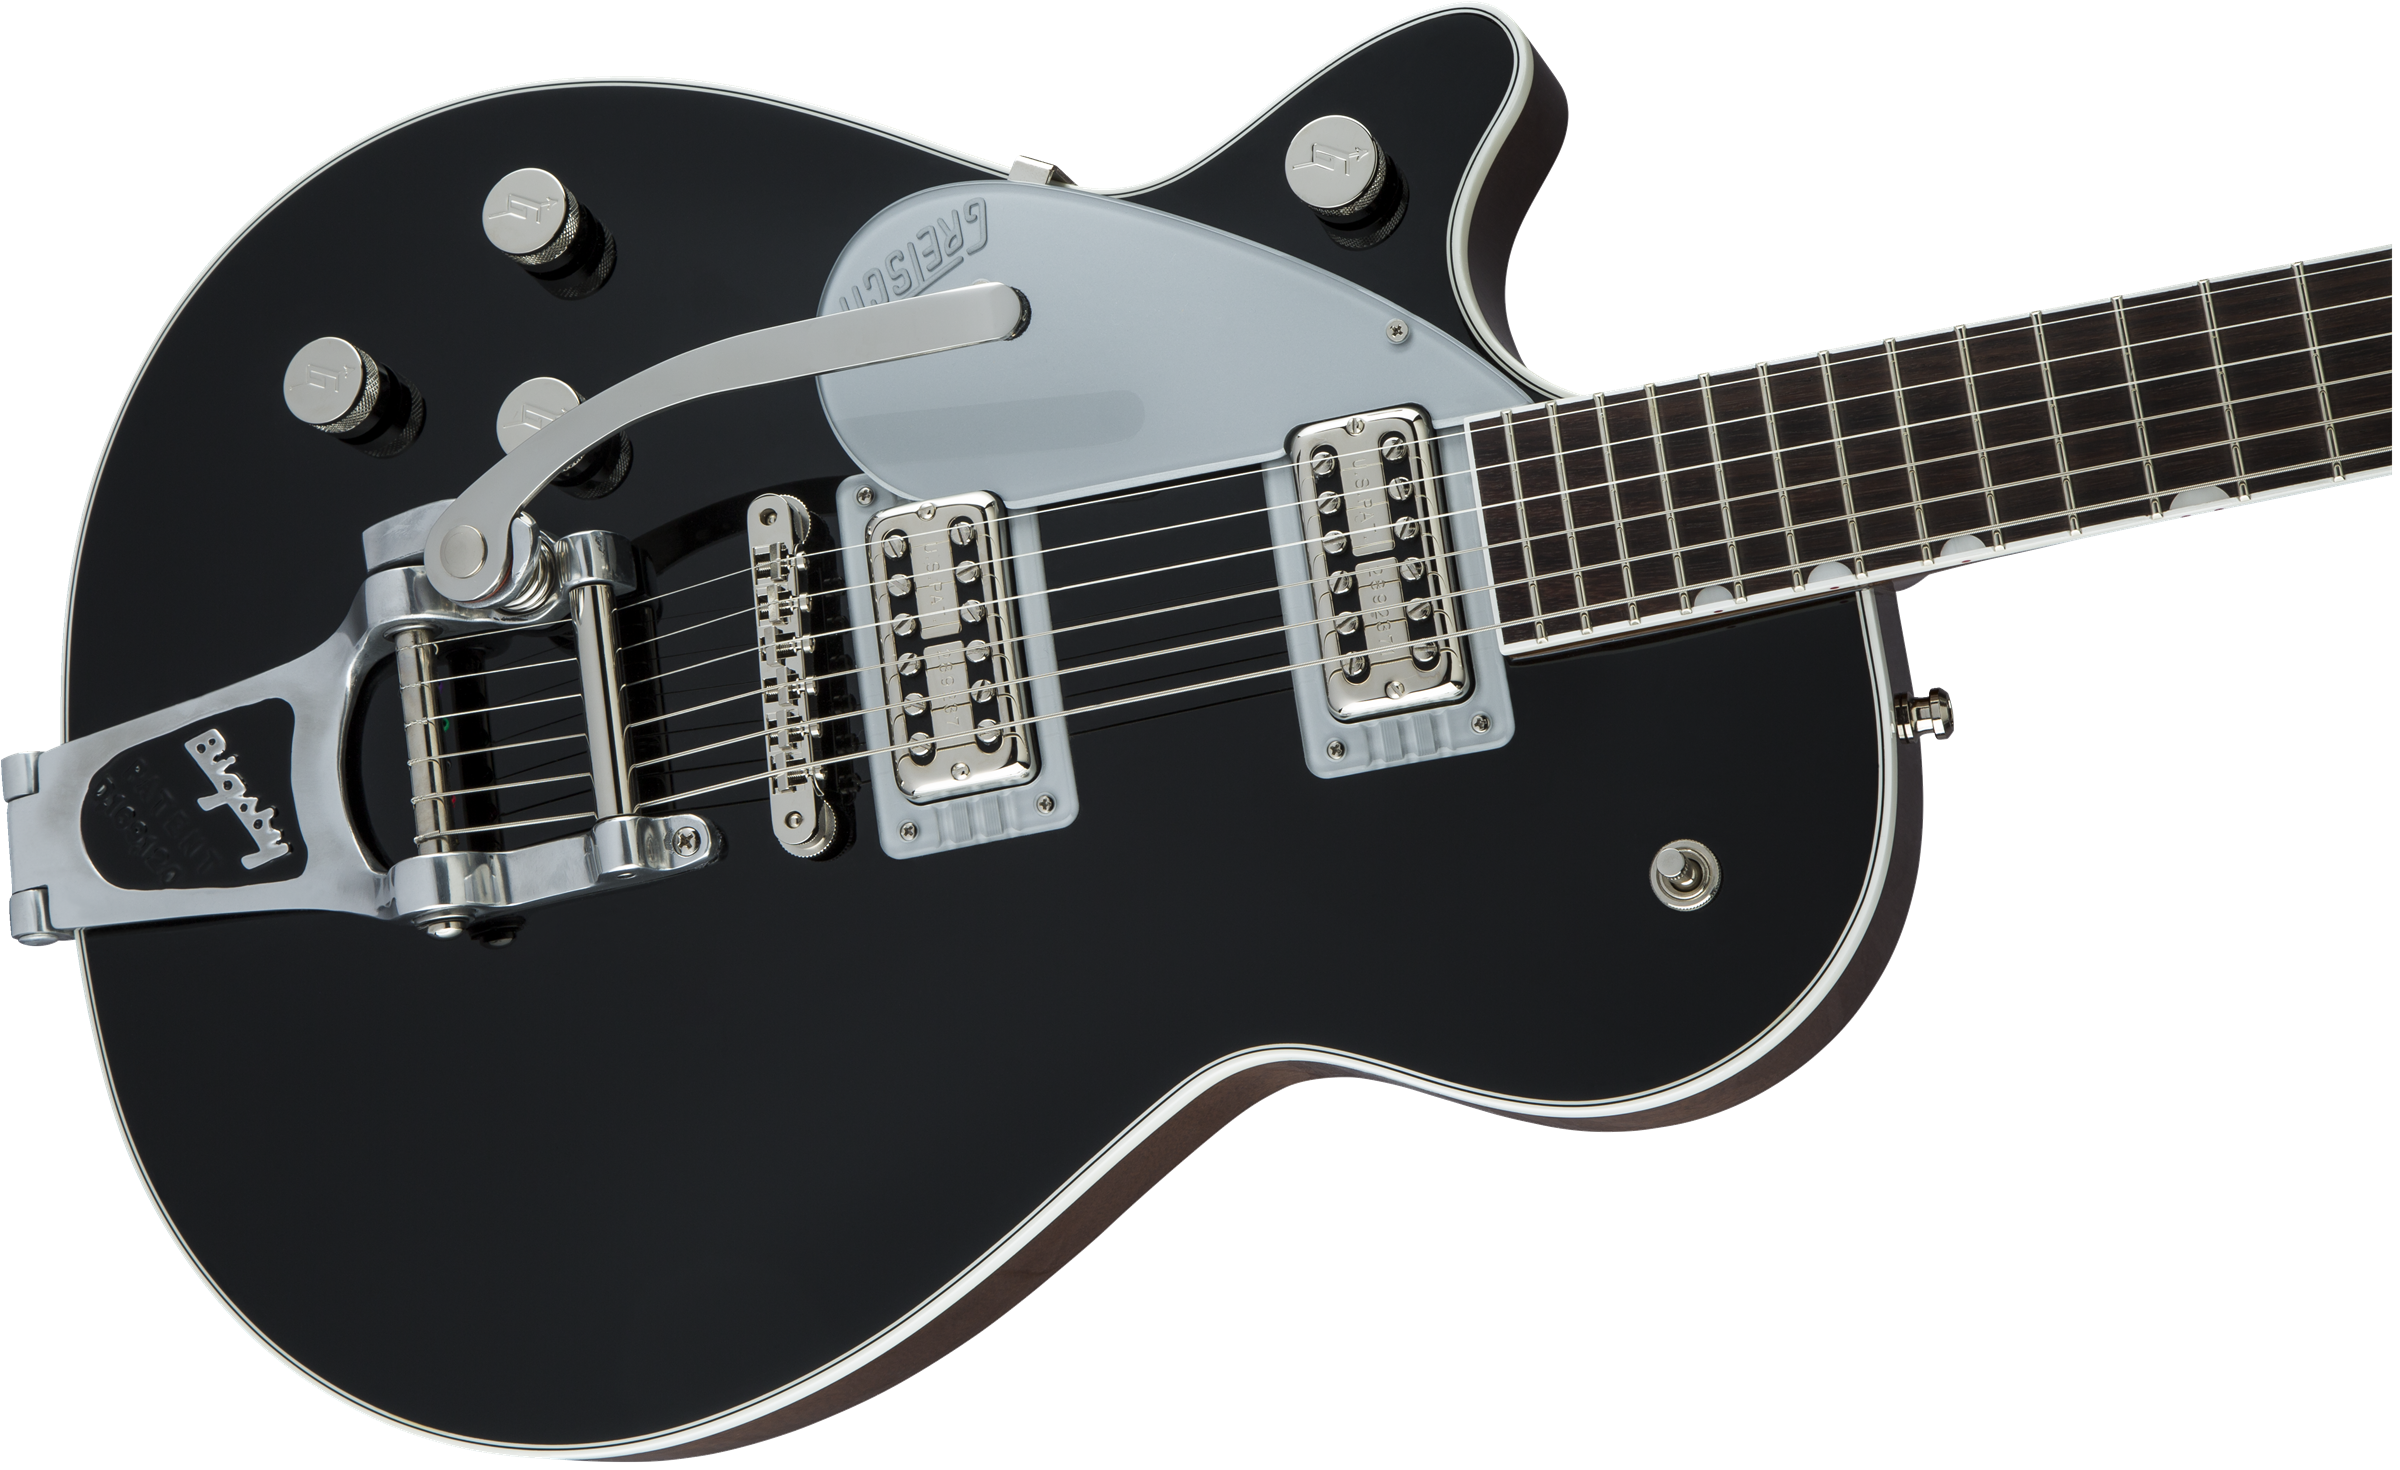 Gretsch G6128T Players Edition Jet FT Left Handed Electric Guitar - Black